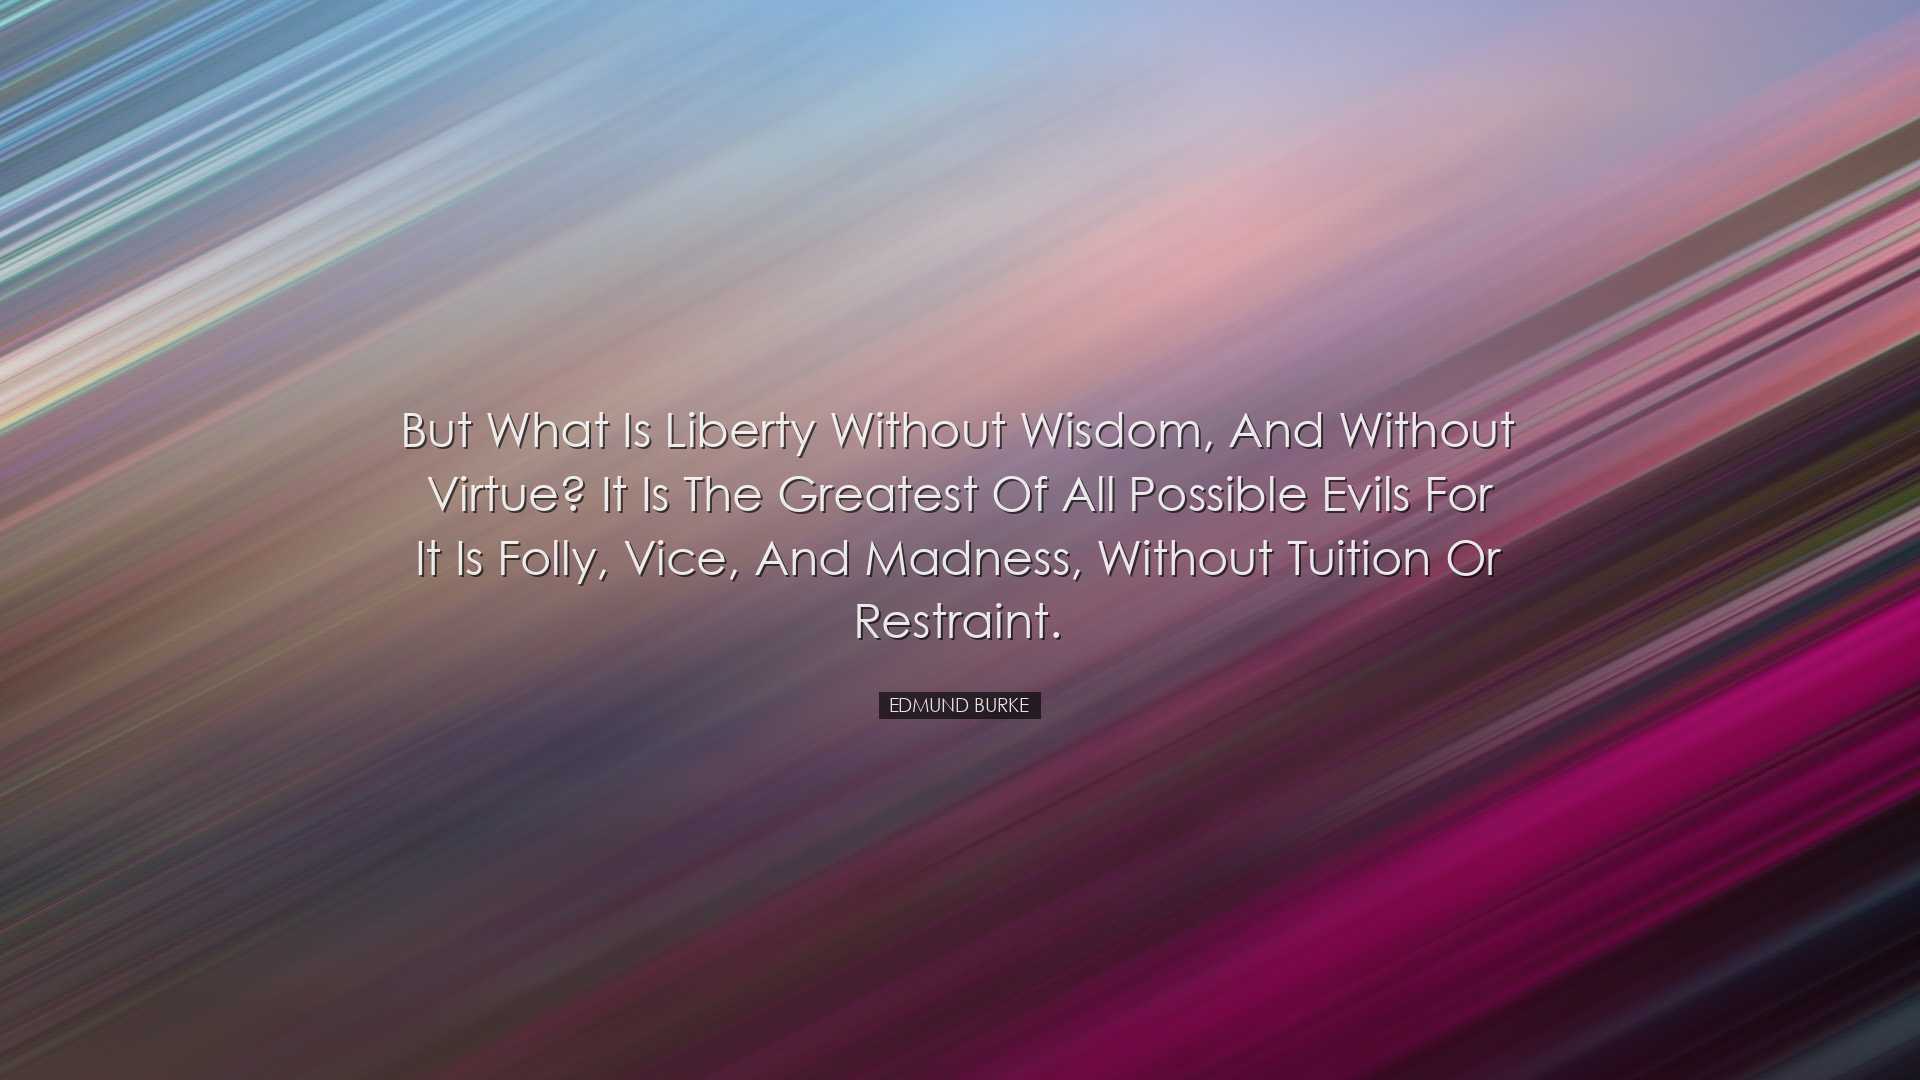 But what is liberty without wisdom, and without virtue? It is the